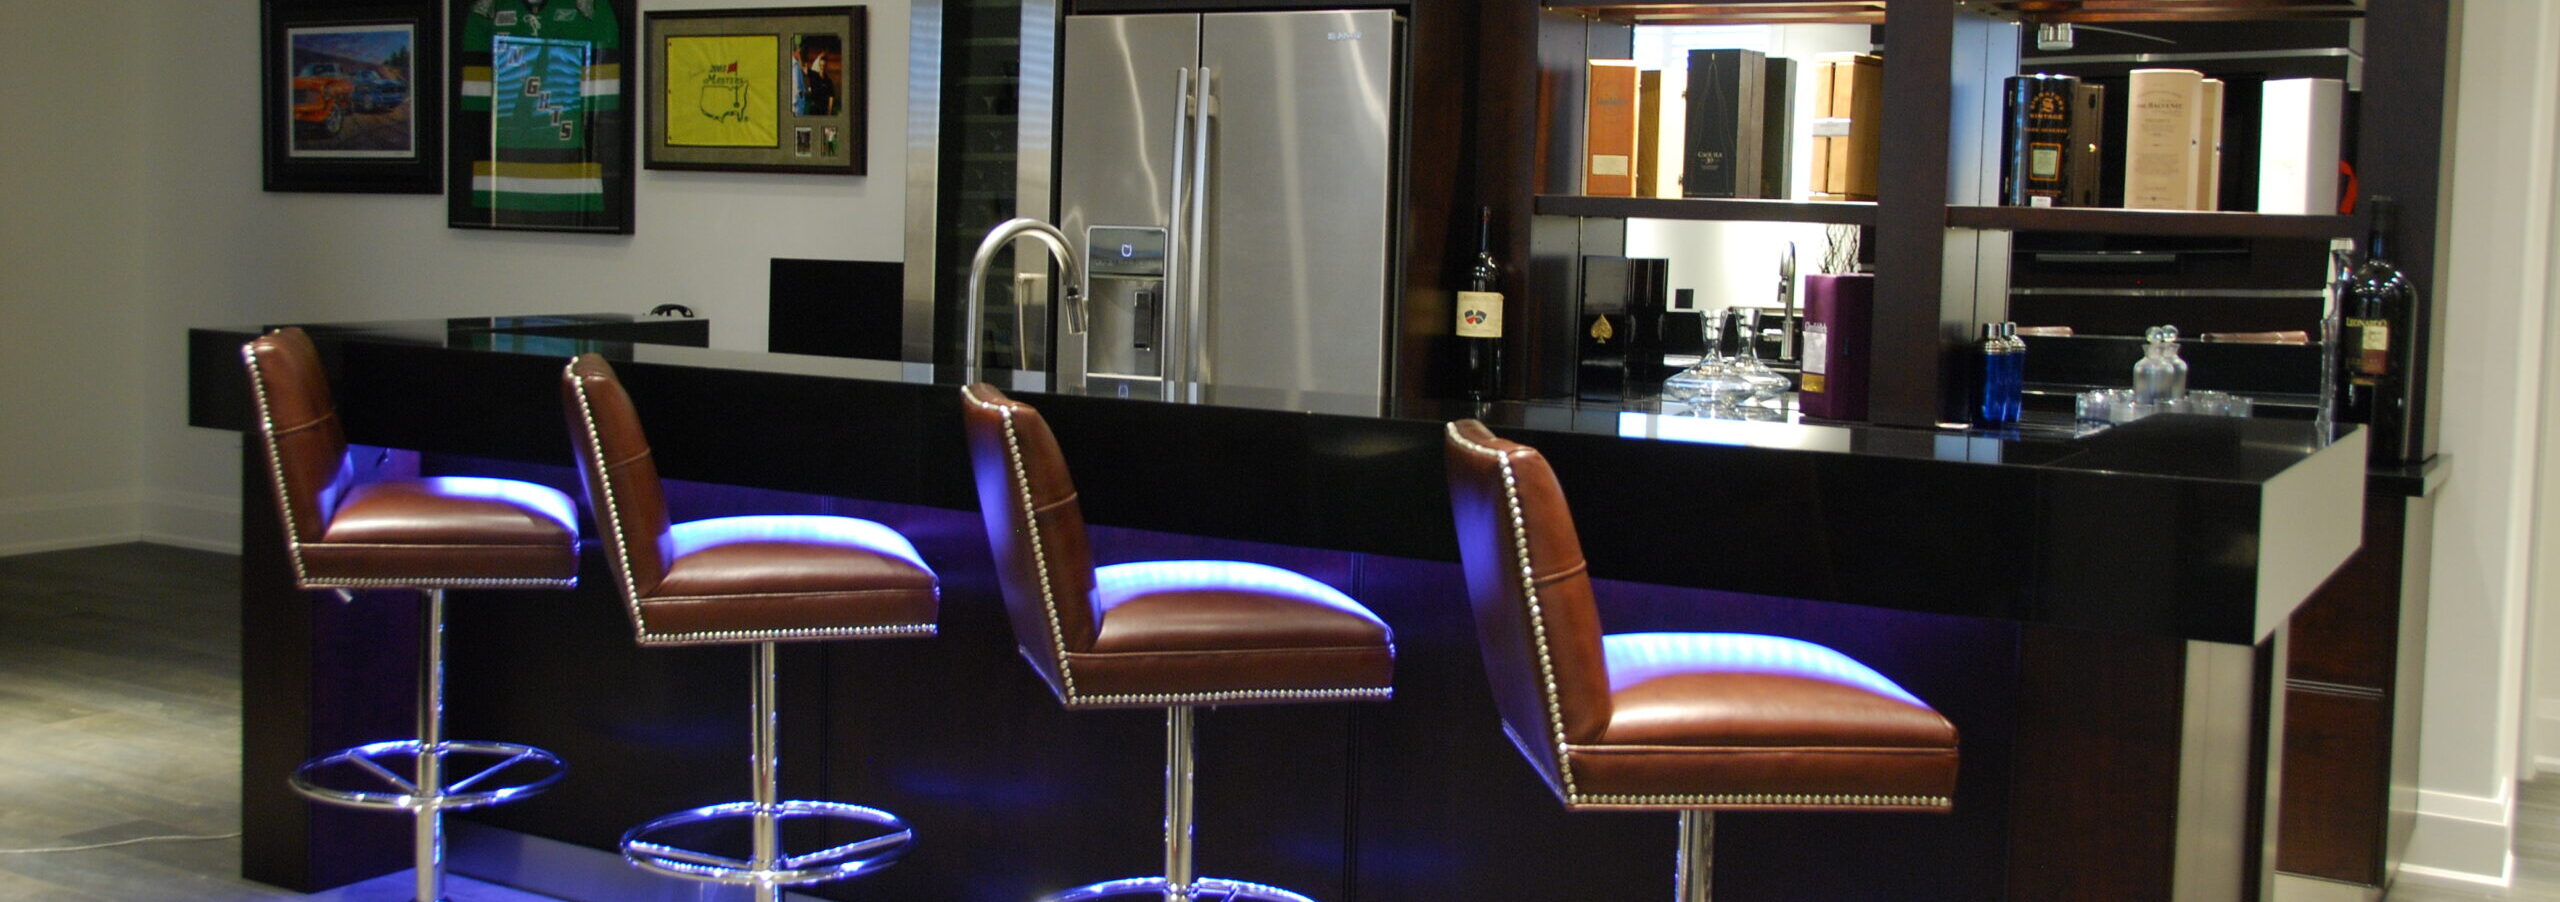 Basement bar with glossy finish on island and shelving. Blue glowing lights under the bar with stools.